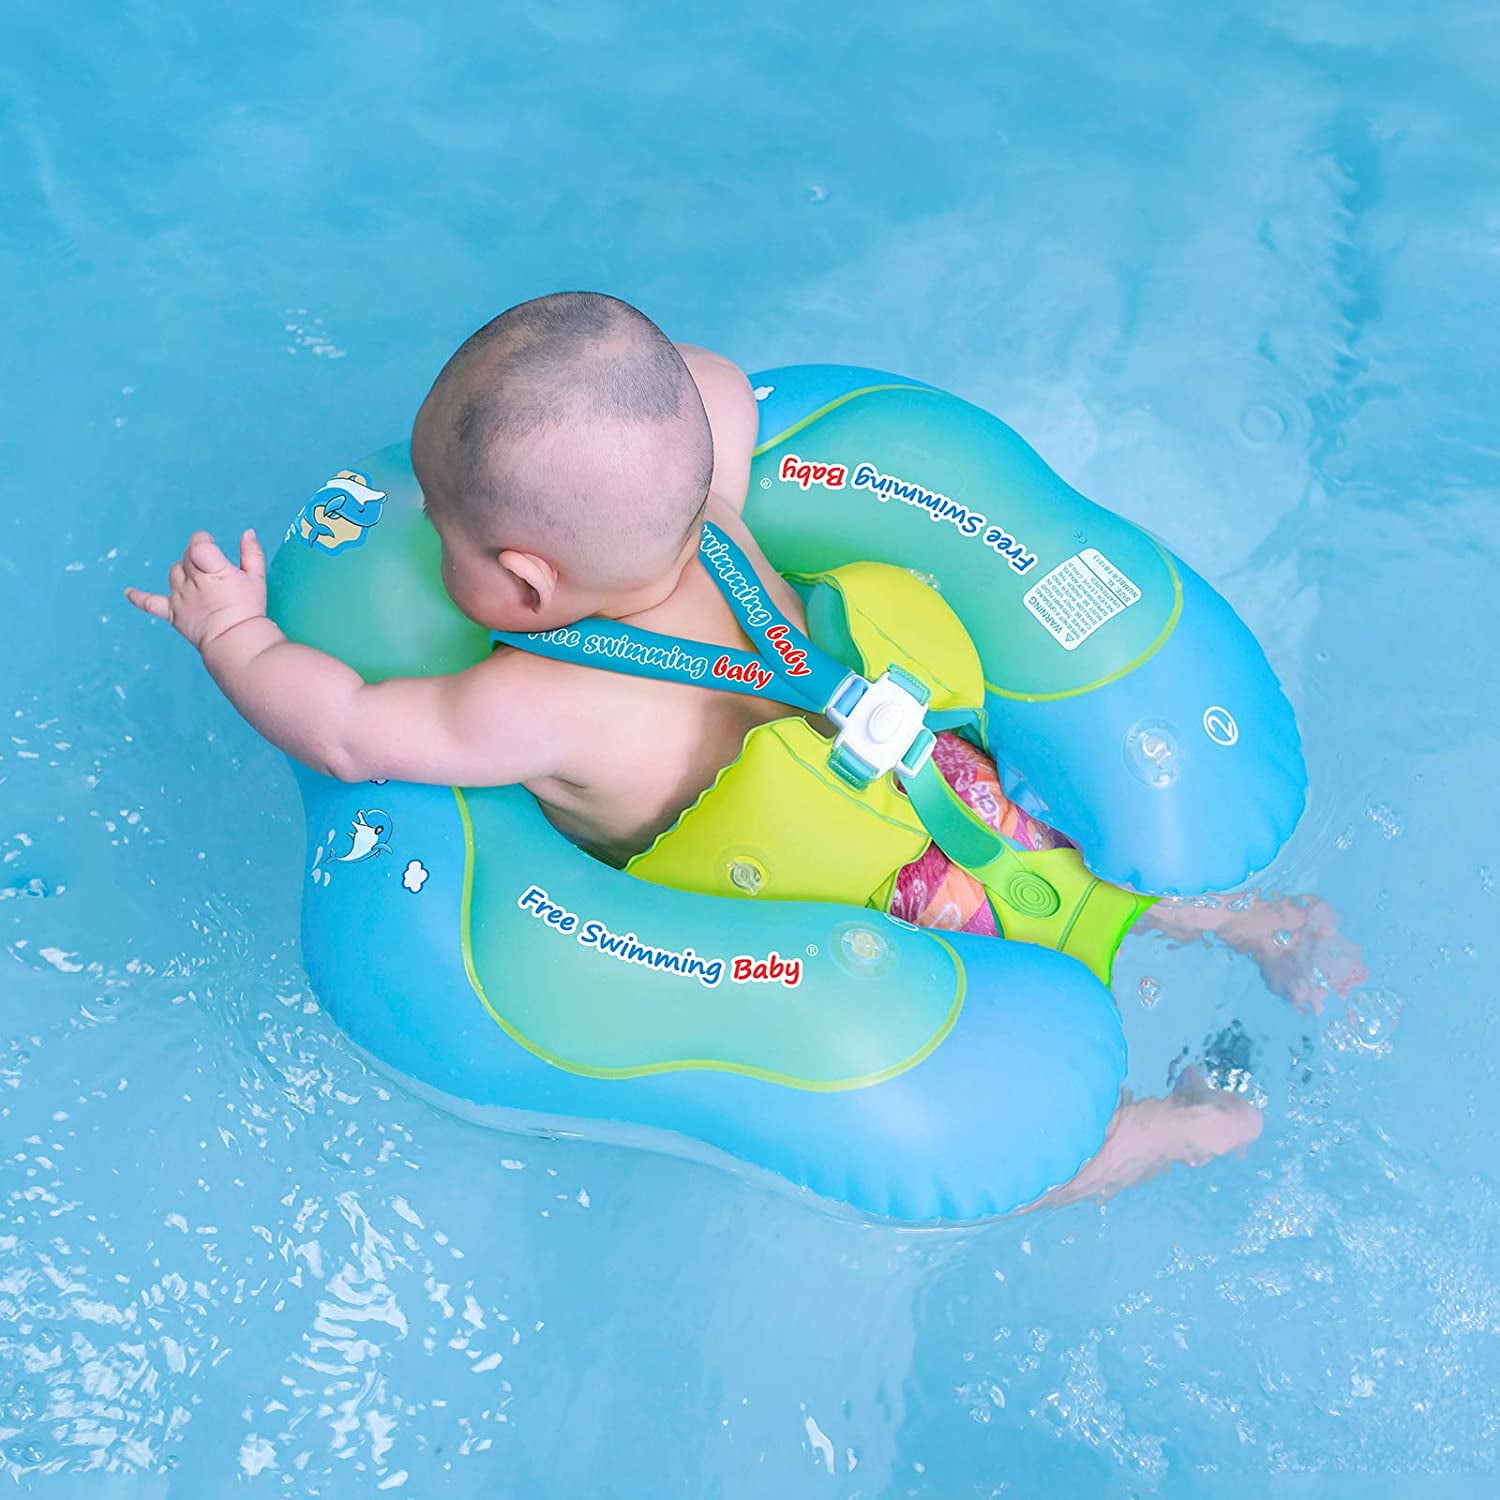 INTEX Inflatable Baby Swimming Pool Float Swim Seat Support Pool Inflatable New 